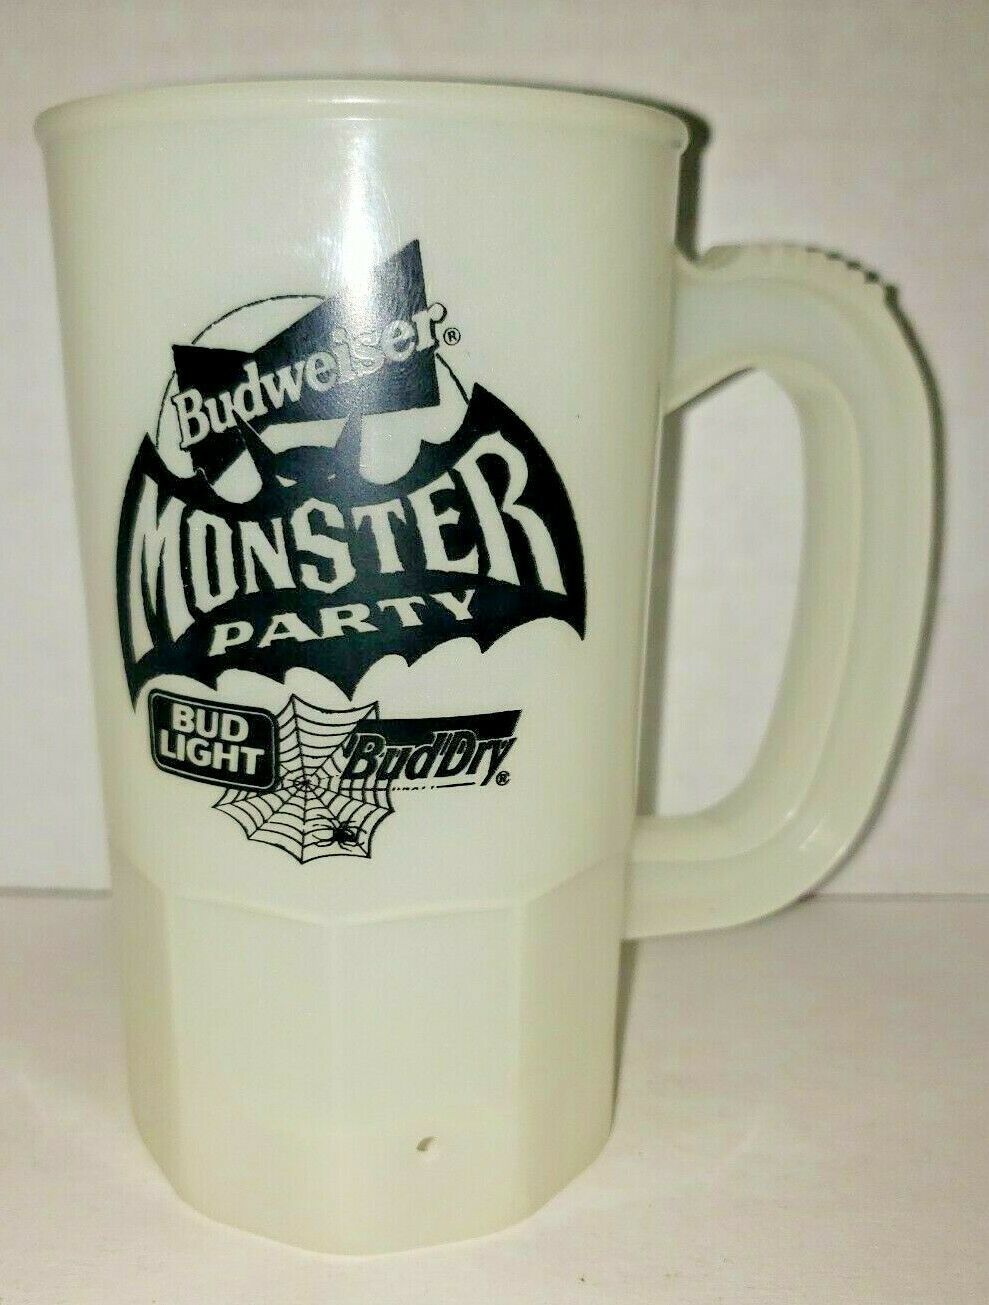 Budweiser Vintage Label Plastic Cup - The Beer Gear Store